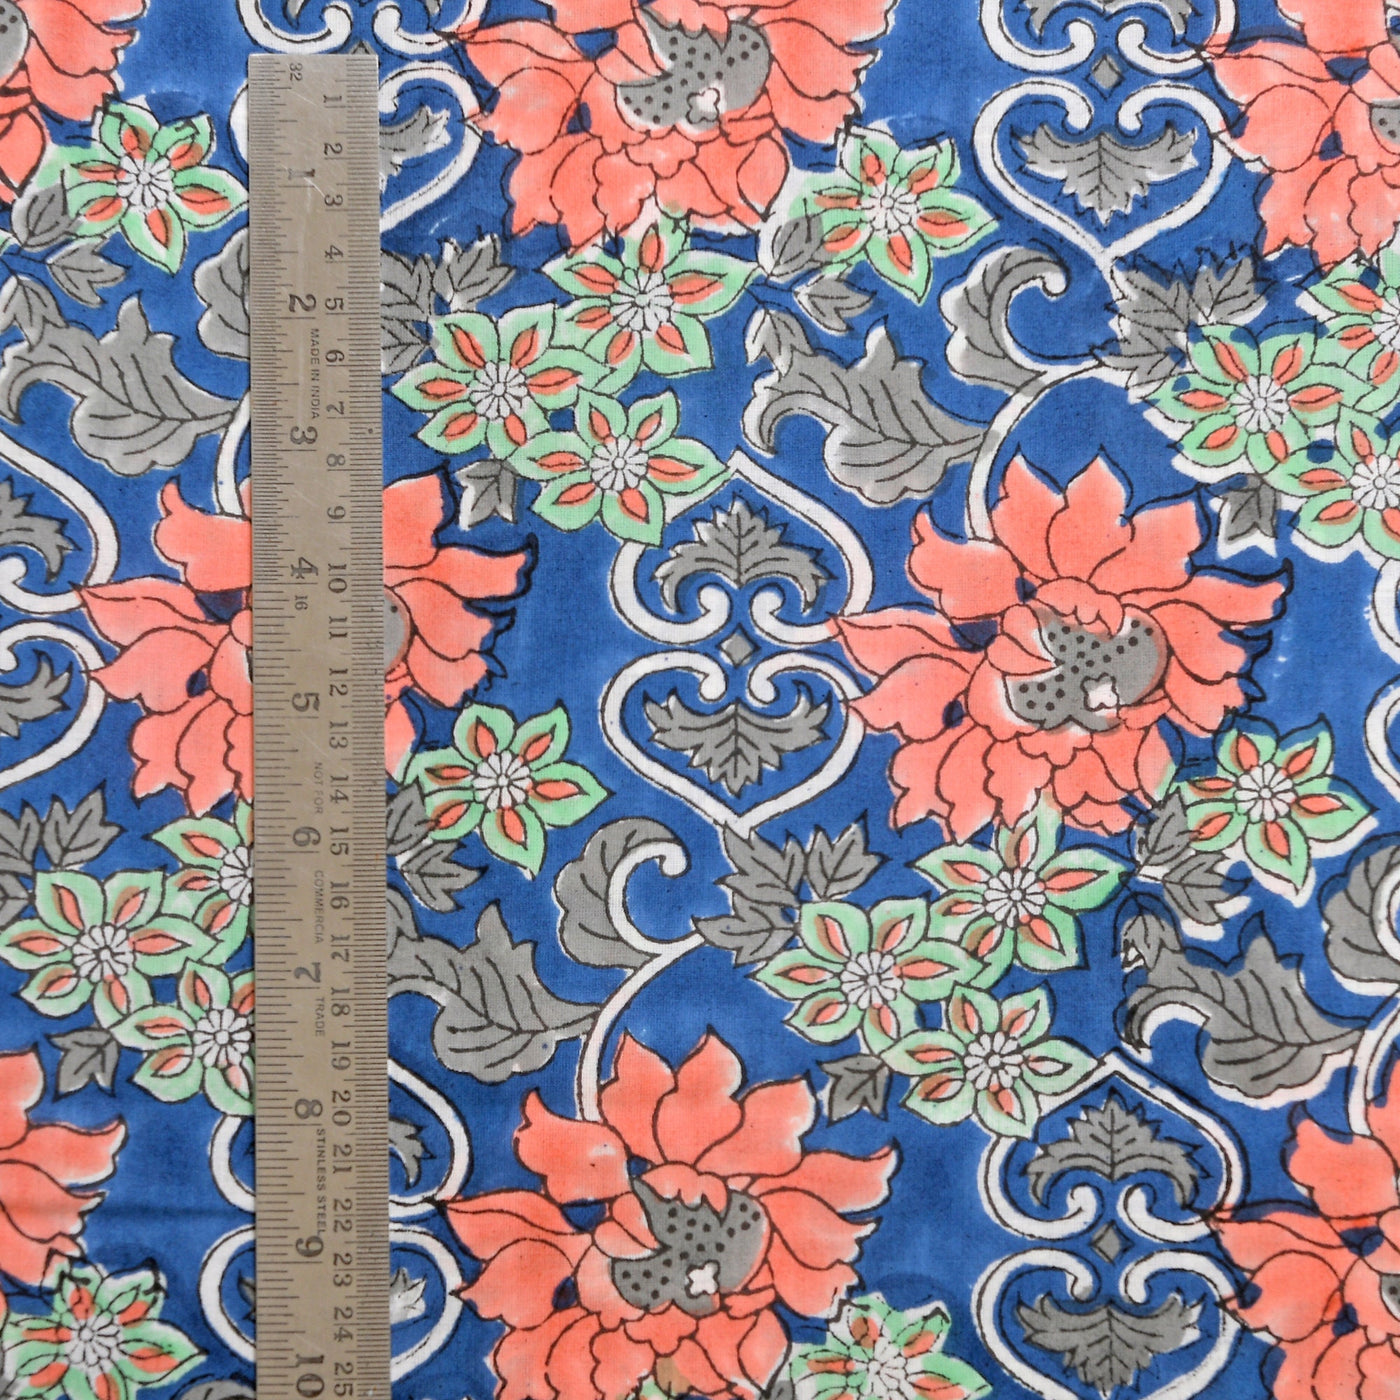 Cold Steel Blue, Salmon Pink, Mint Green Indian Floral Hand Block Printed 100% Cotton Cloth, Fabric by the Yard, Fabric for Curtains Pillows